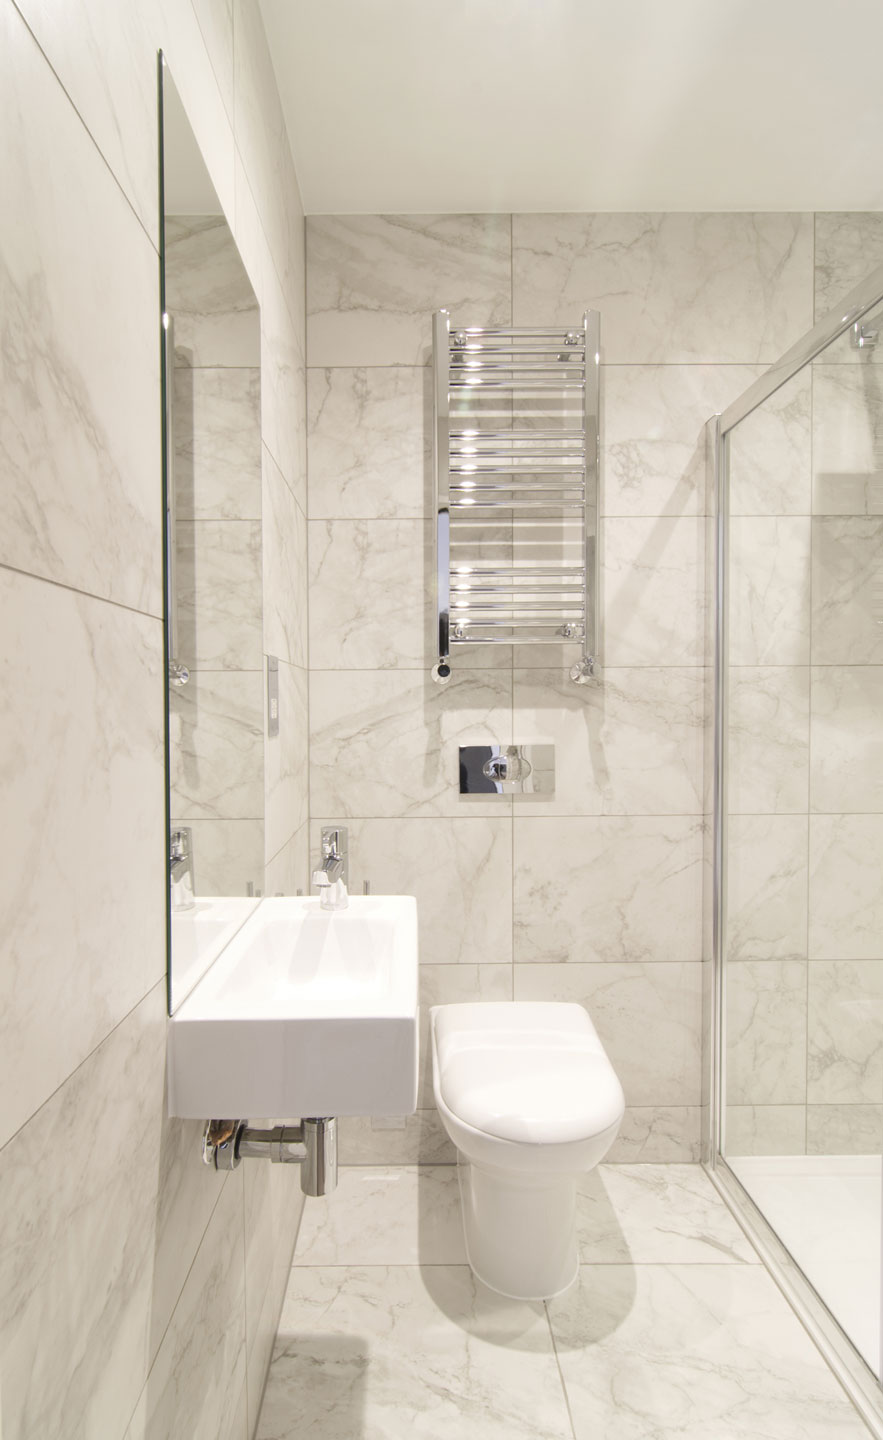 Small-contemporary-bathroom-in-white-with-glass-shower-area-64329